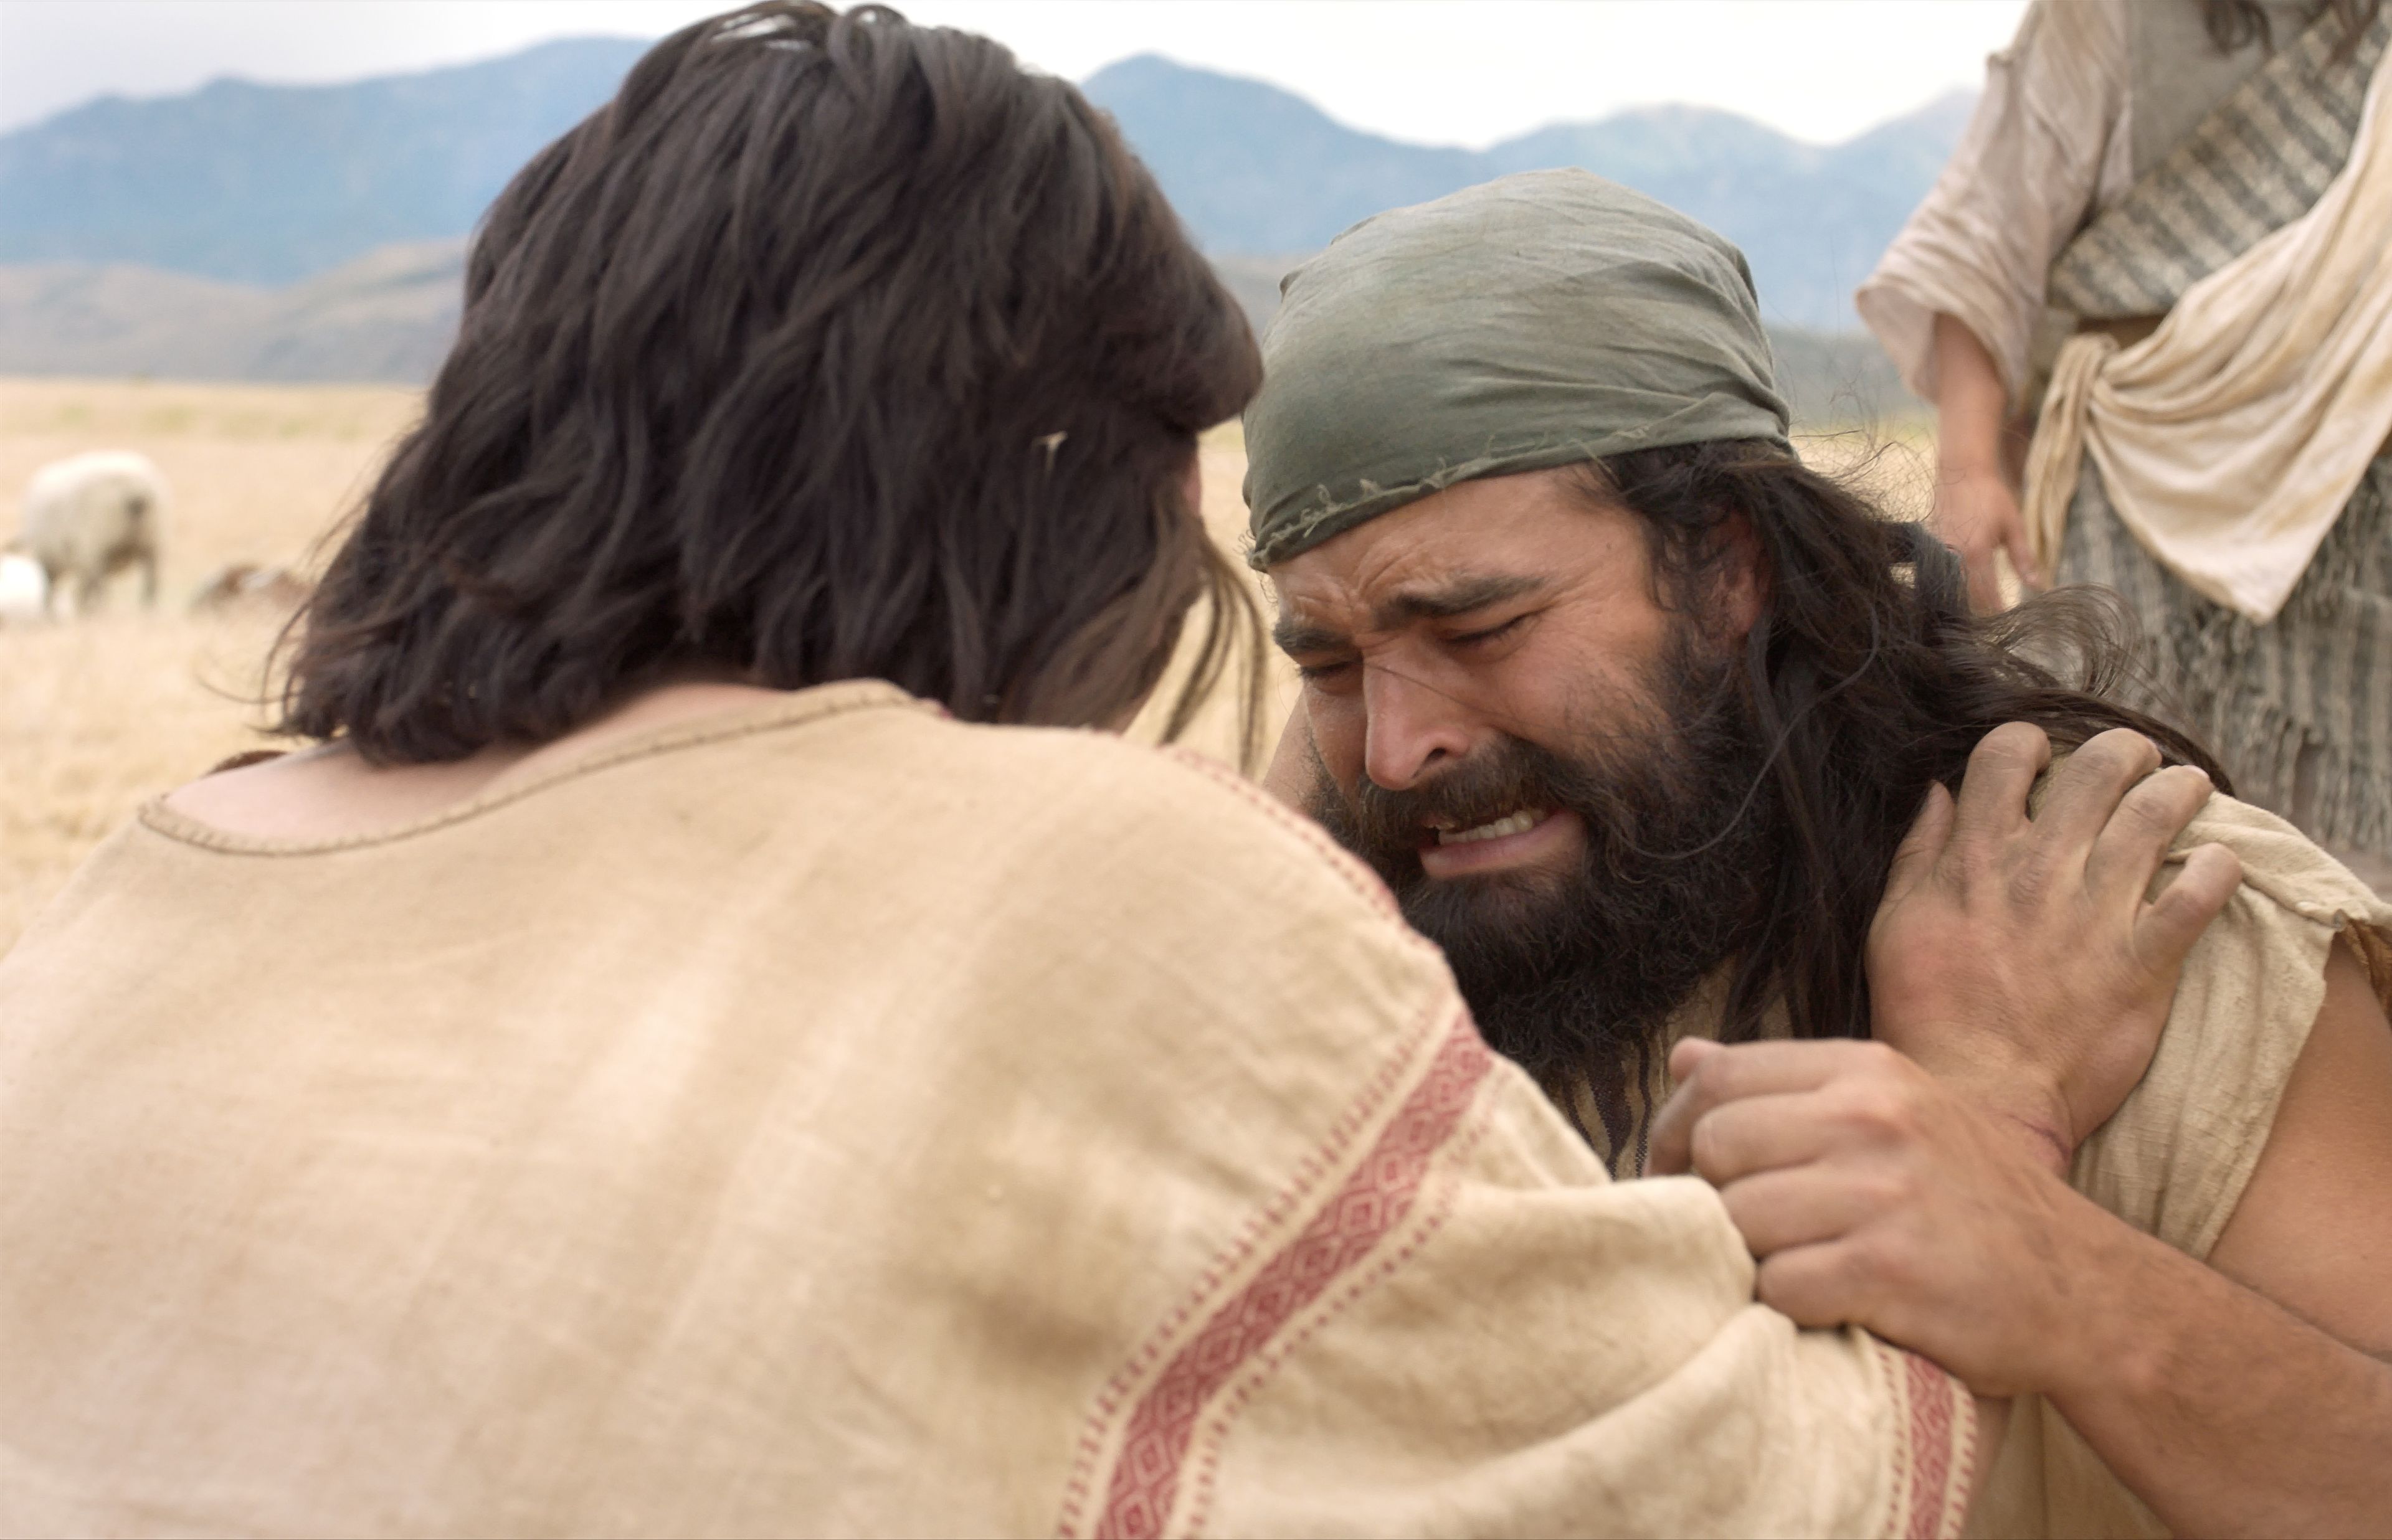 Laman pleads for forgiveness from Nephi.